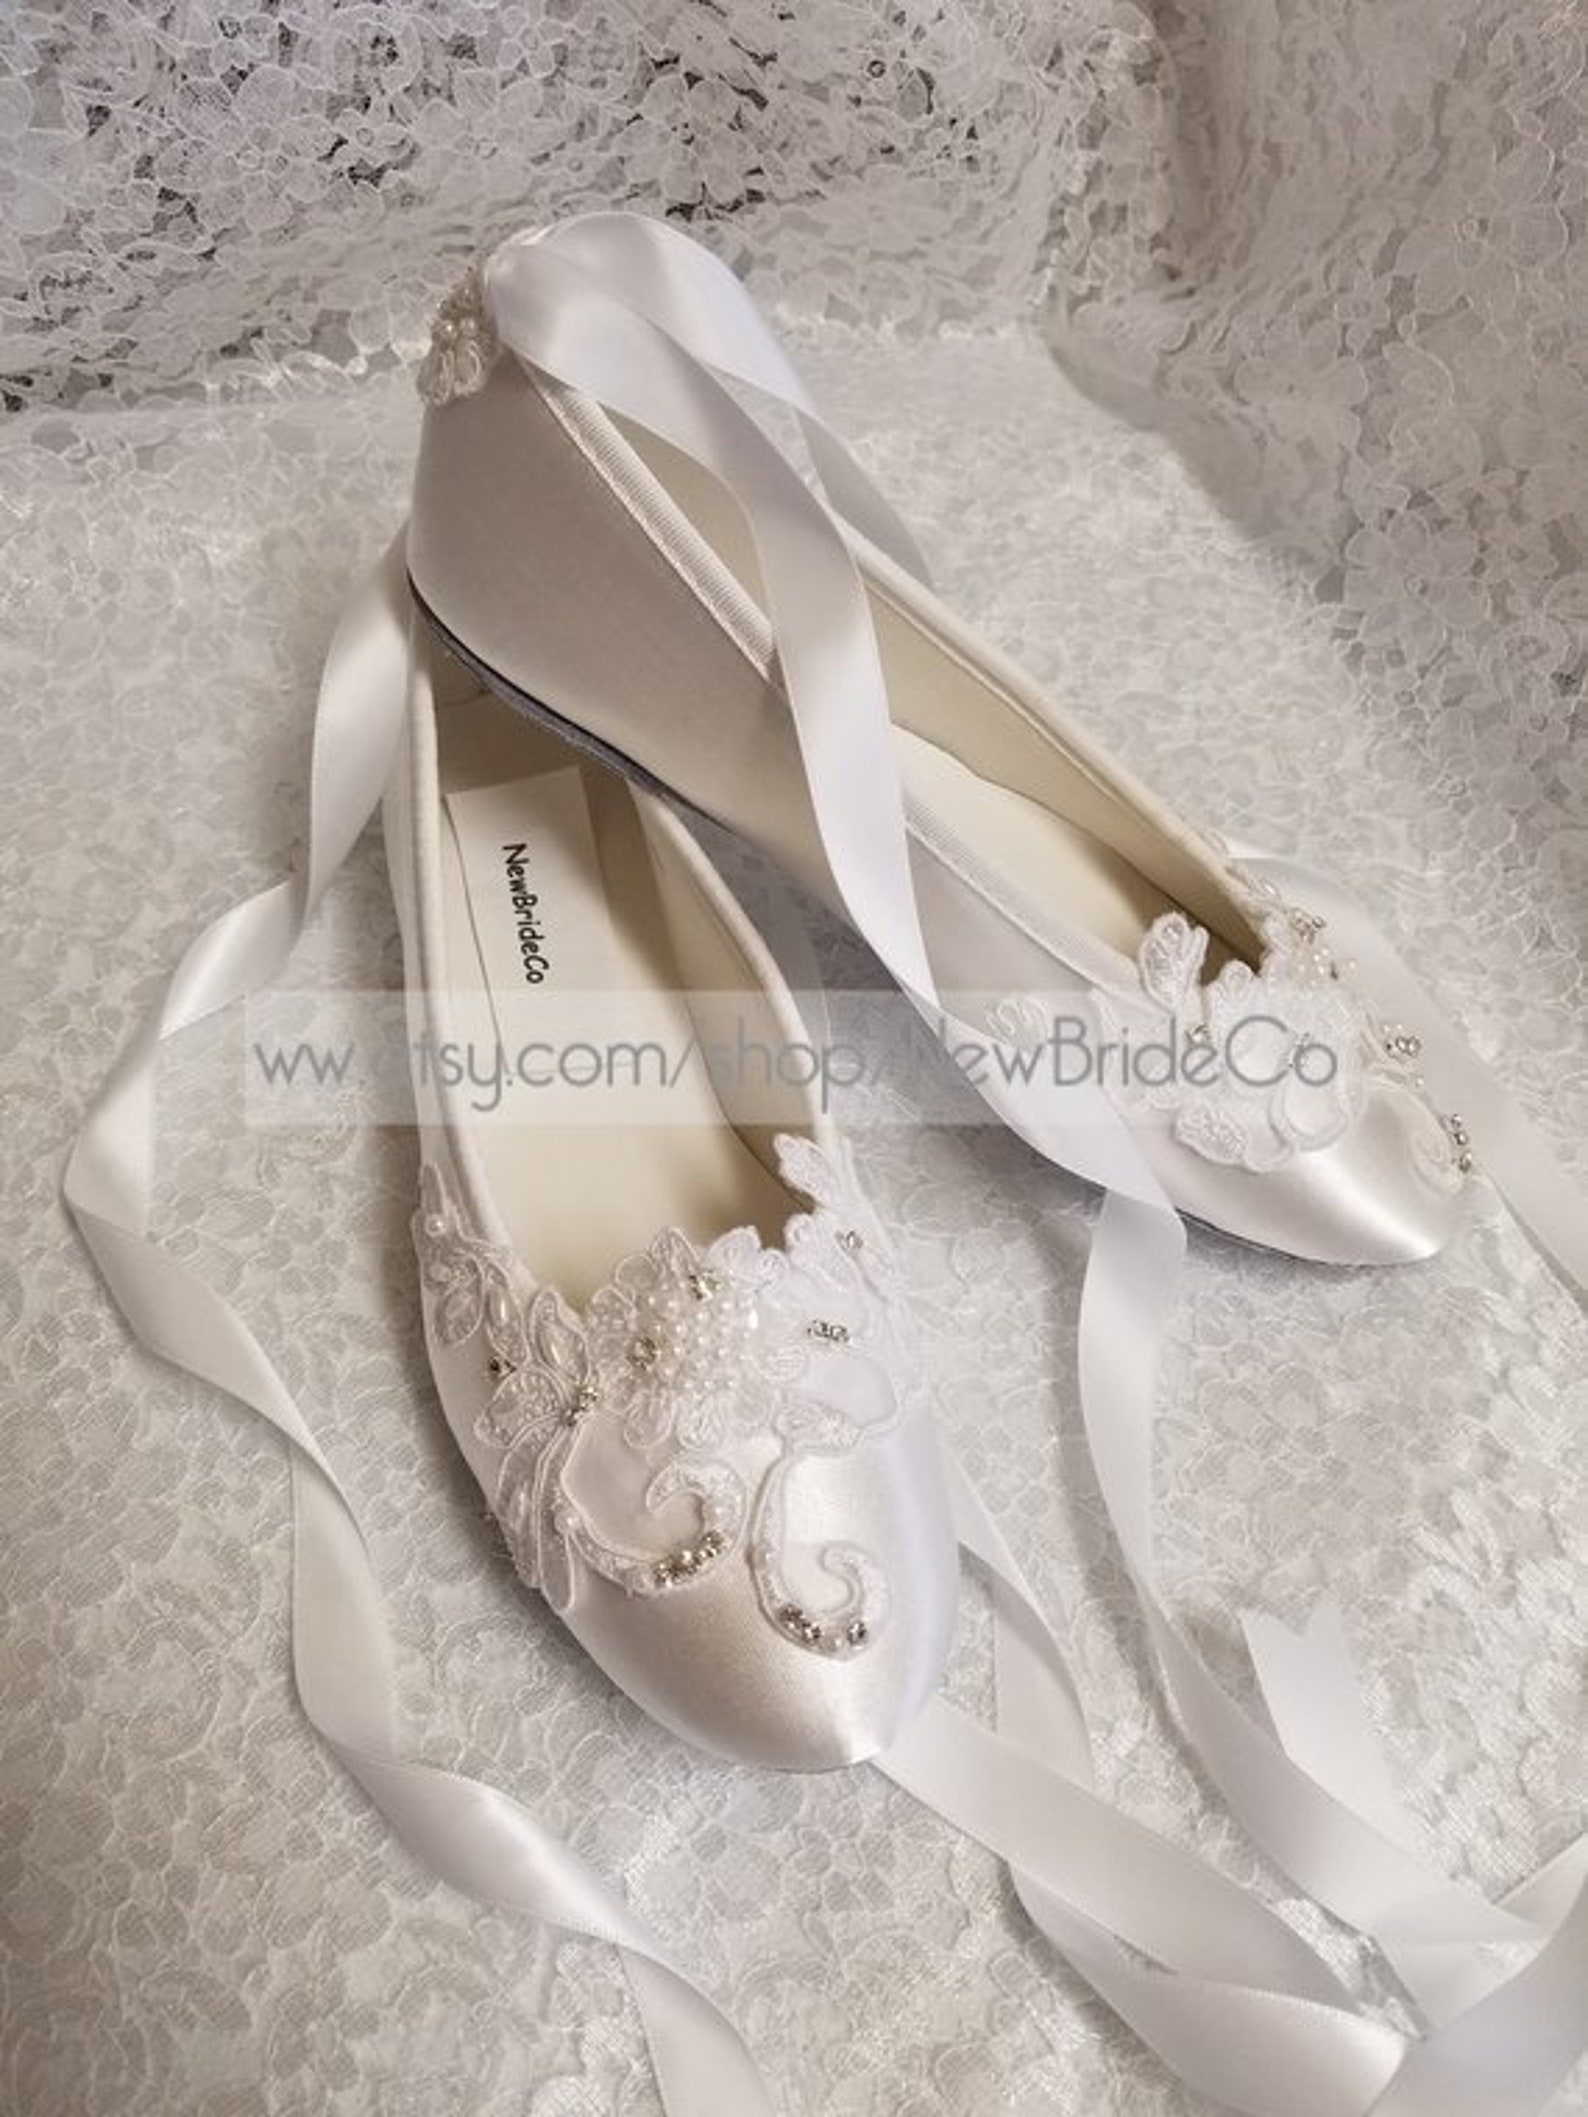 brides white wedding flats, satin ivory shoes, lace applique with pearls, lace up ribbon ballet style slipper, comfortable weddi